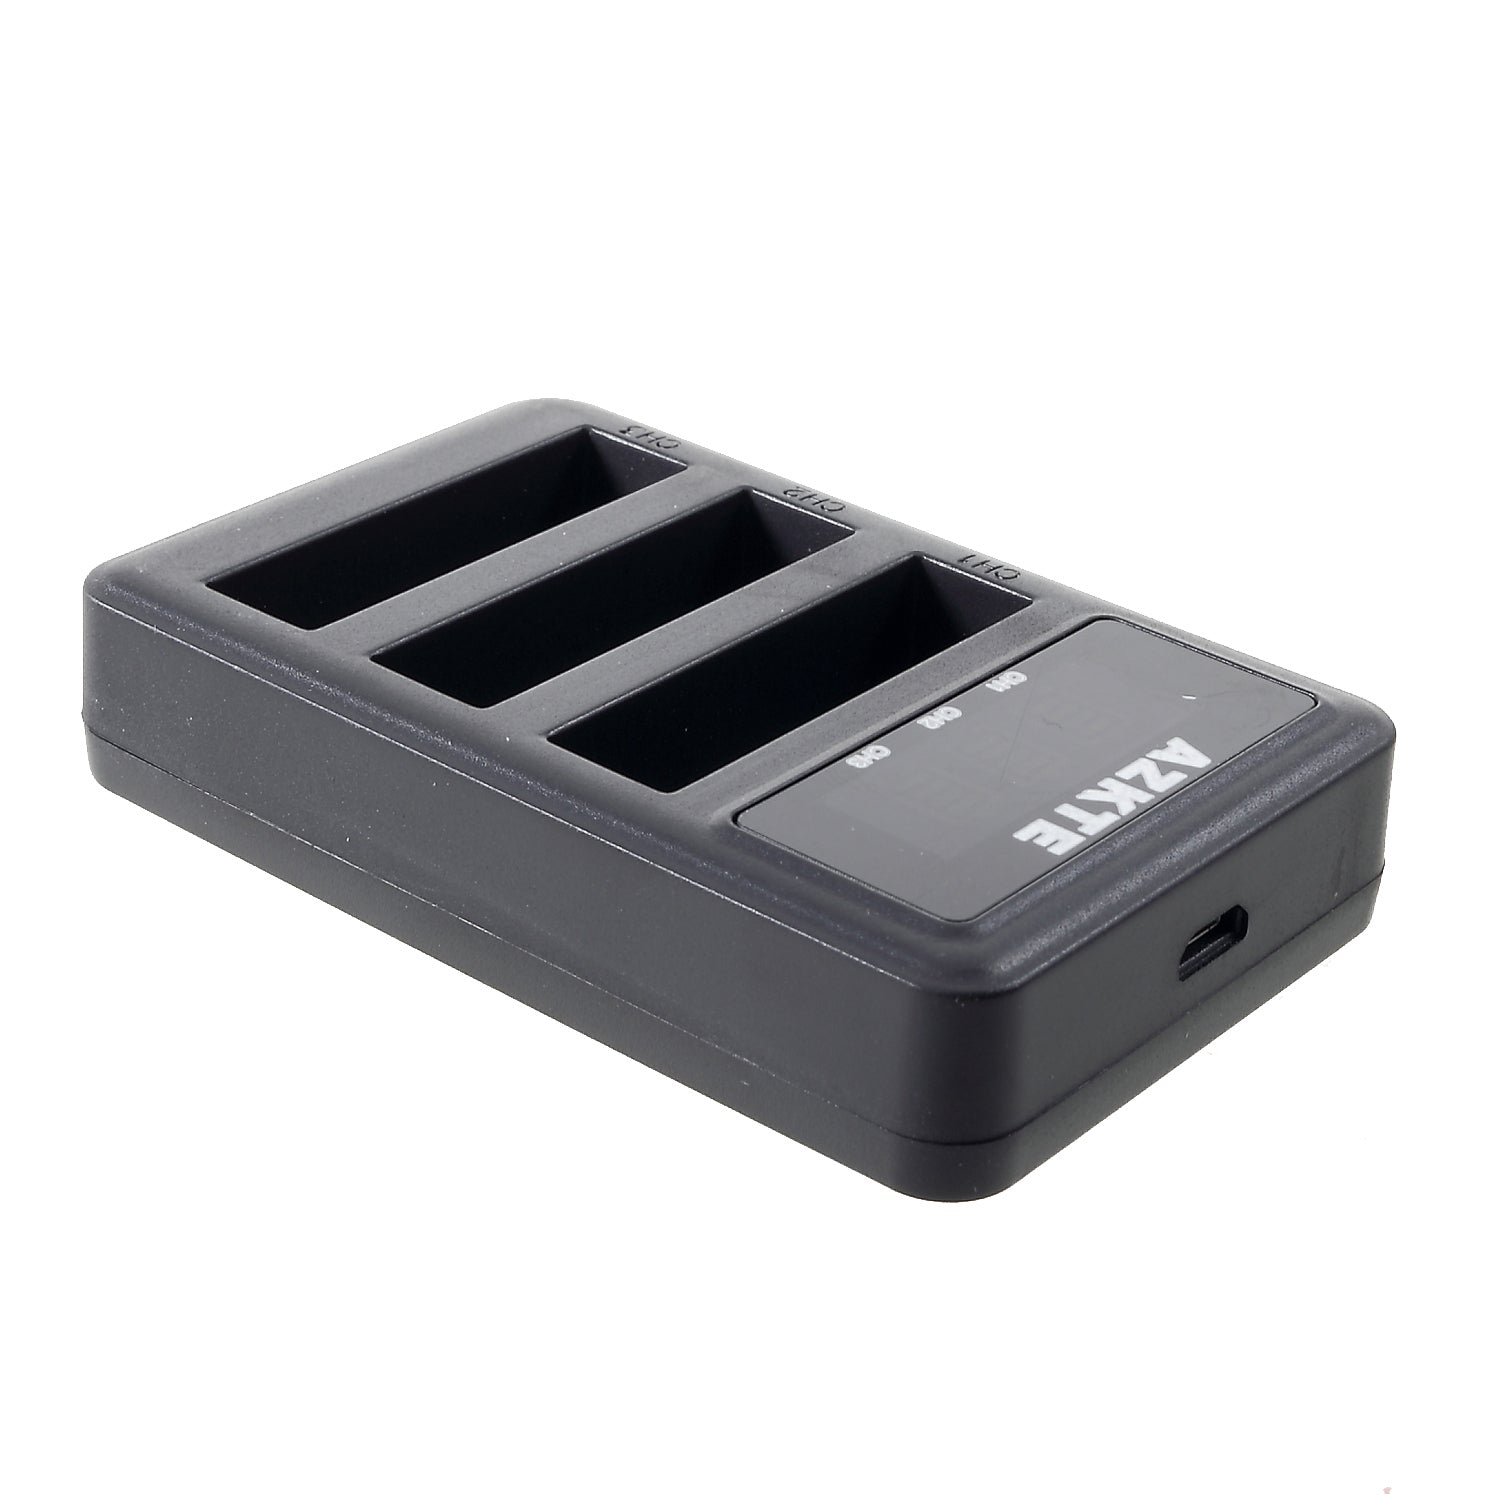 AT-M29 [3 Channel] Battery Charger for Mijia Camera with [LCD Display]